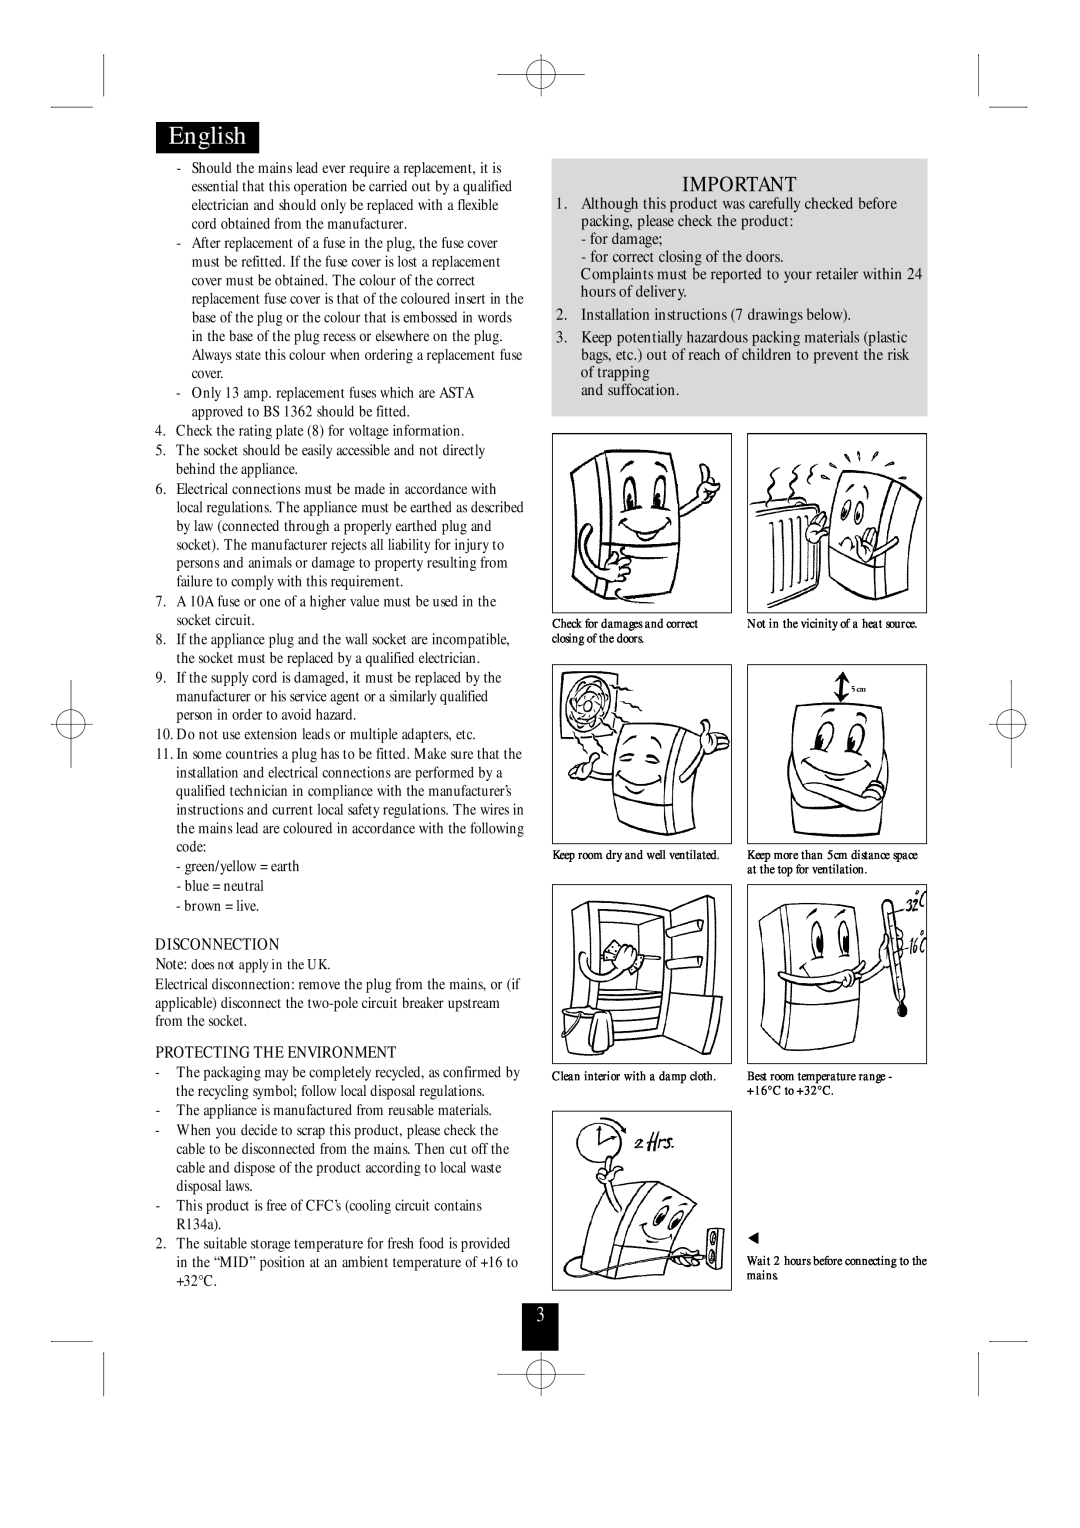 Daewoo ERF-100 for damage for correct closing of the doors, Installation instructions 7 drawings below, and suffocation 